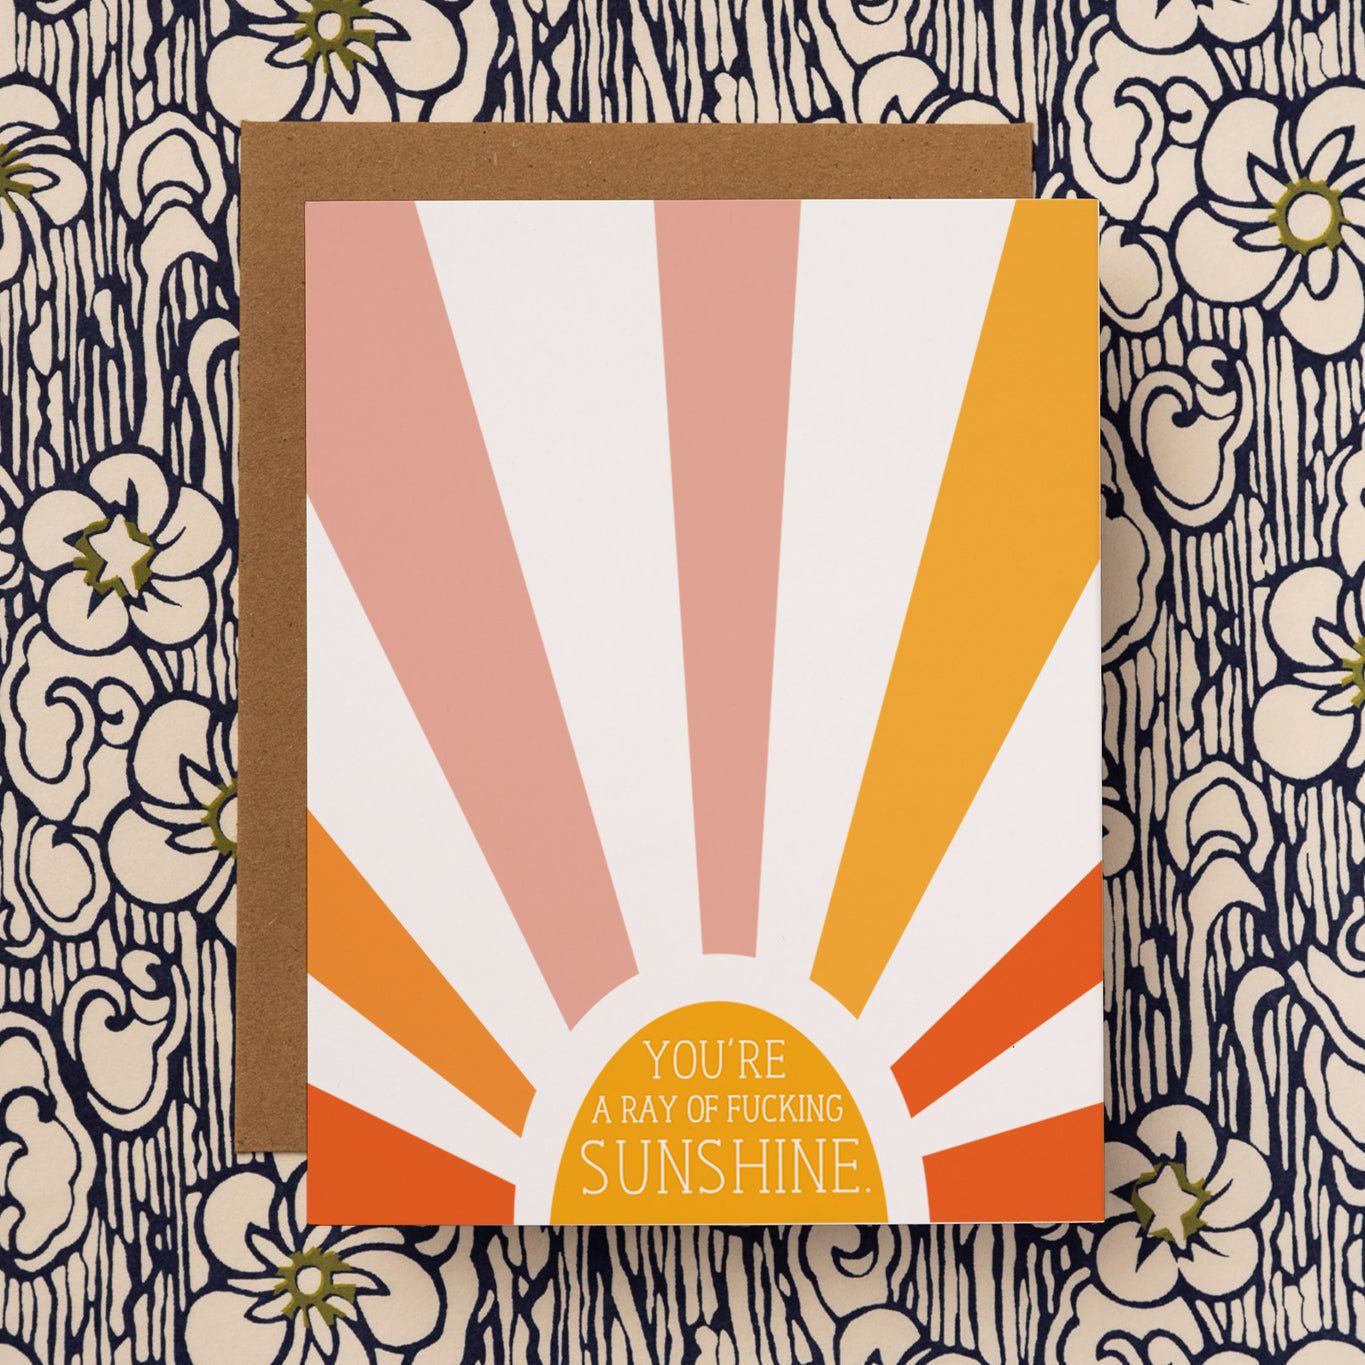 A sarcastic and unique everyday greeting card that reads "You're a ray of fucking sunshine." on the front side. Colorful sunshine illustration on note card.